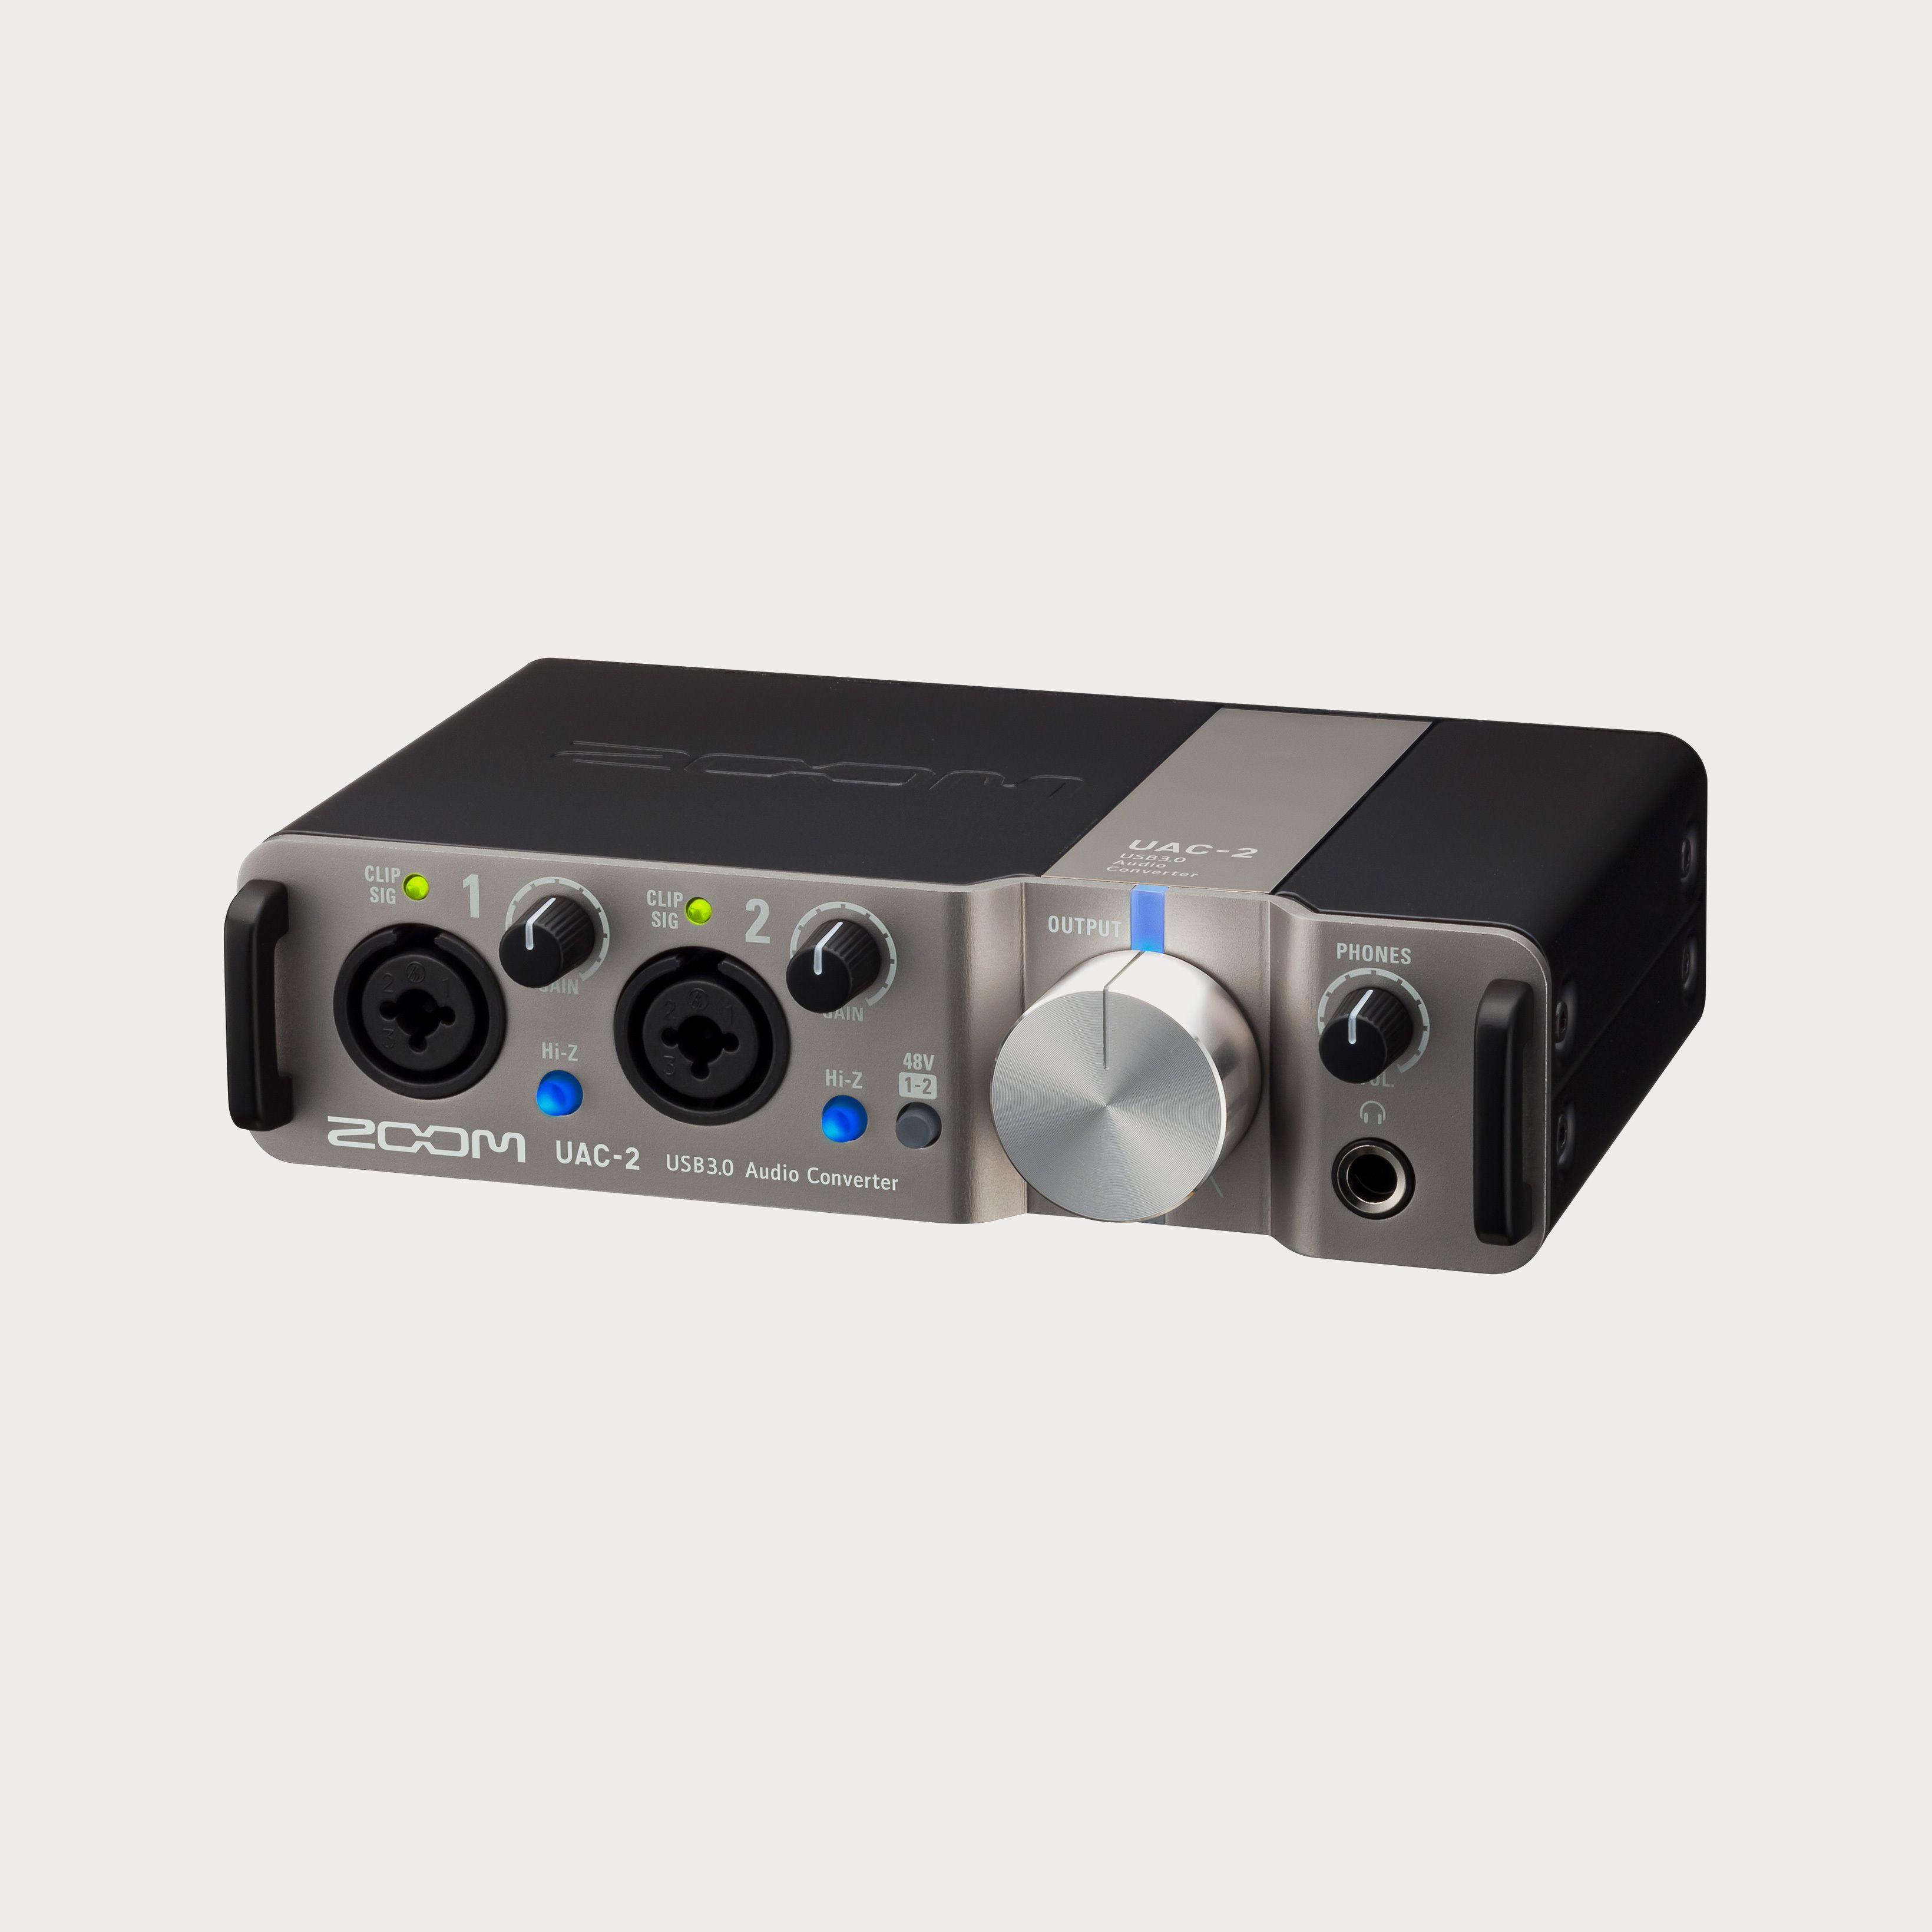 Zoom UAC-2 - USB 3.0 Audio Converter for Mac and PC | Moment